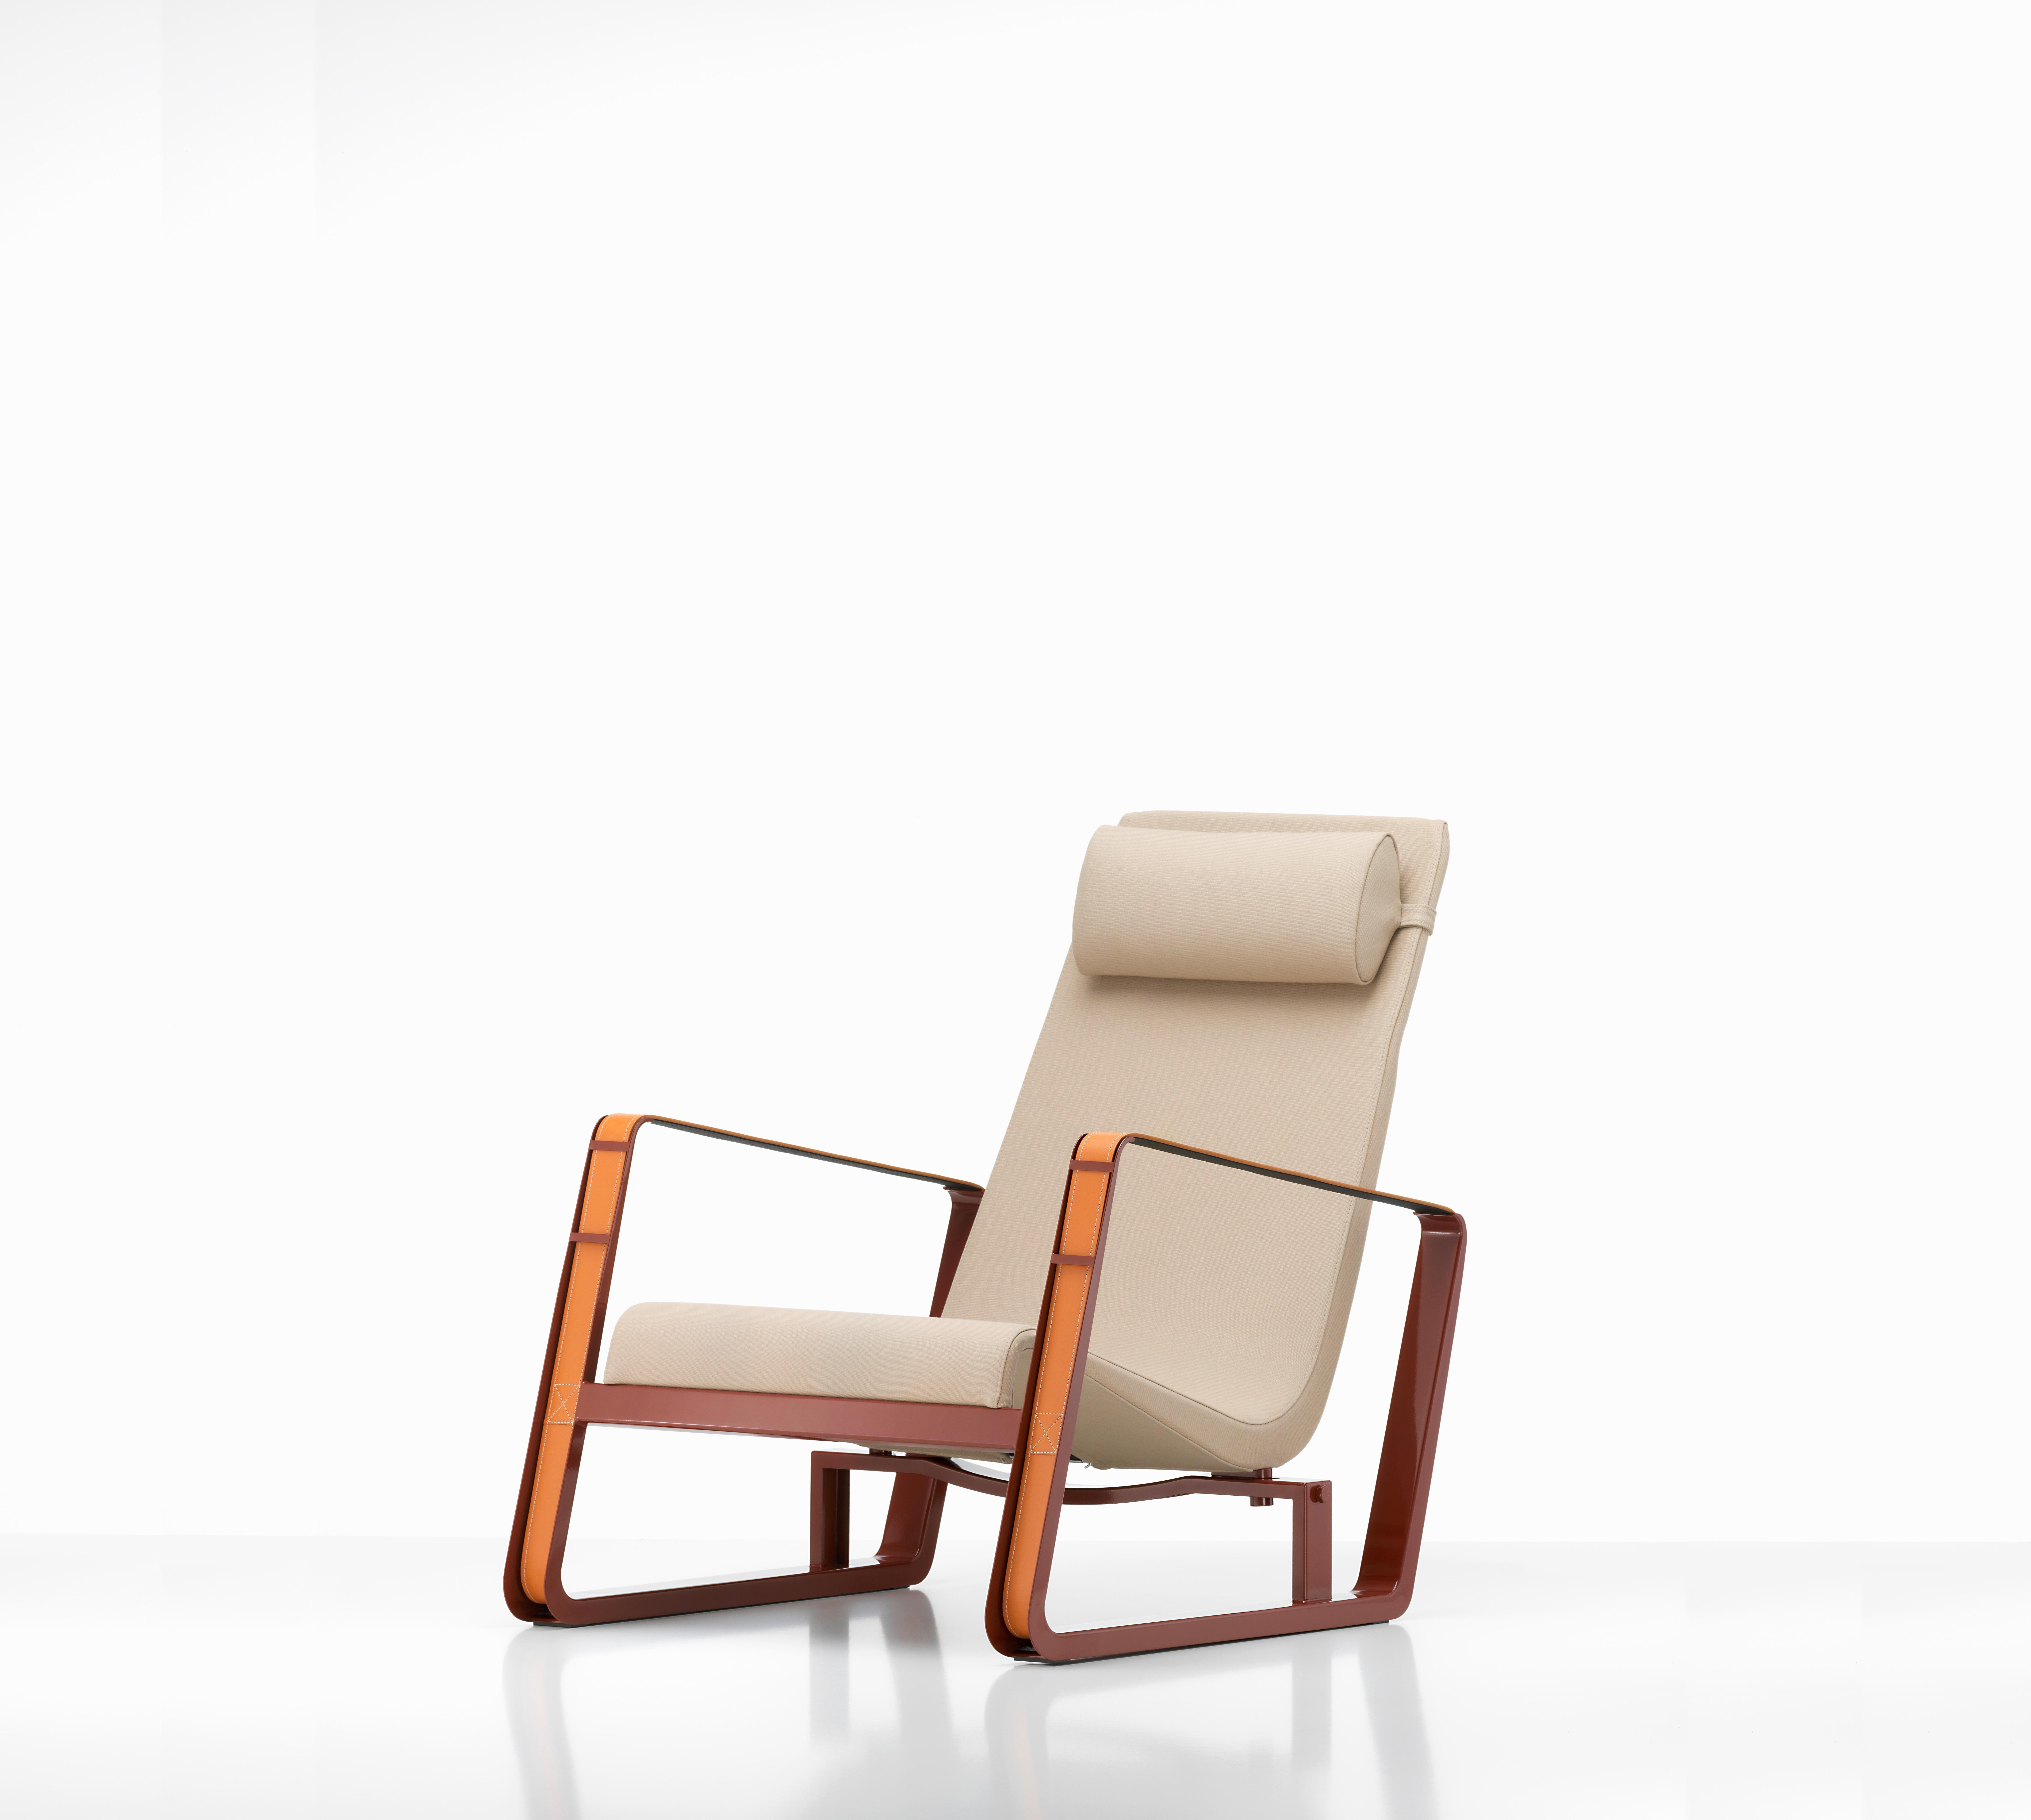 French Jean Prouvé Cité Chair in Beige and Red for Vitra